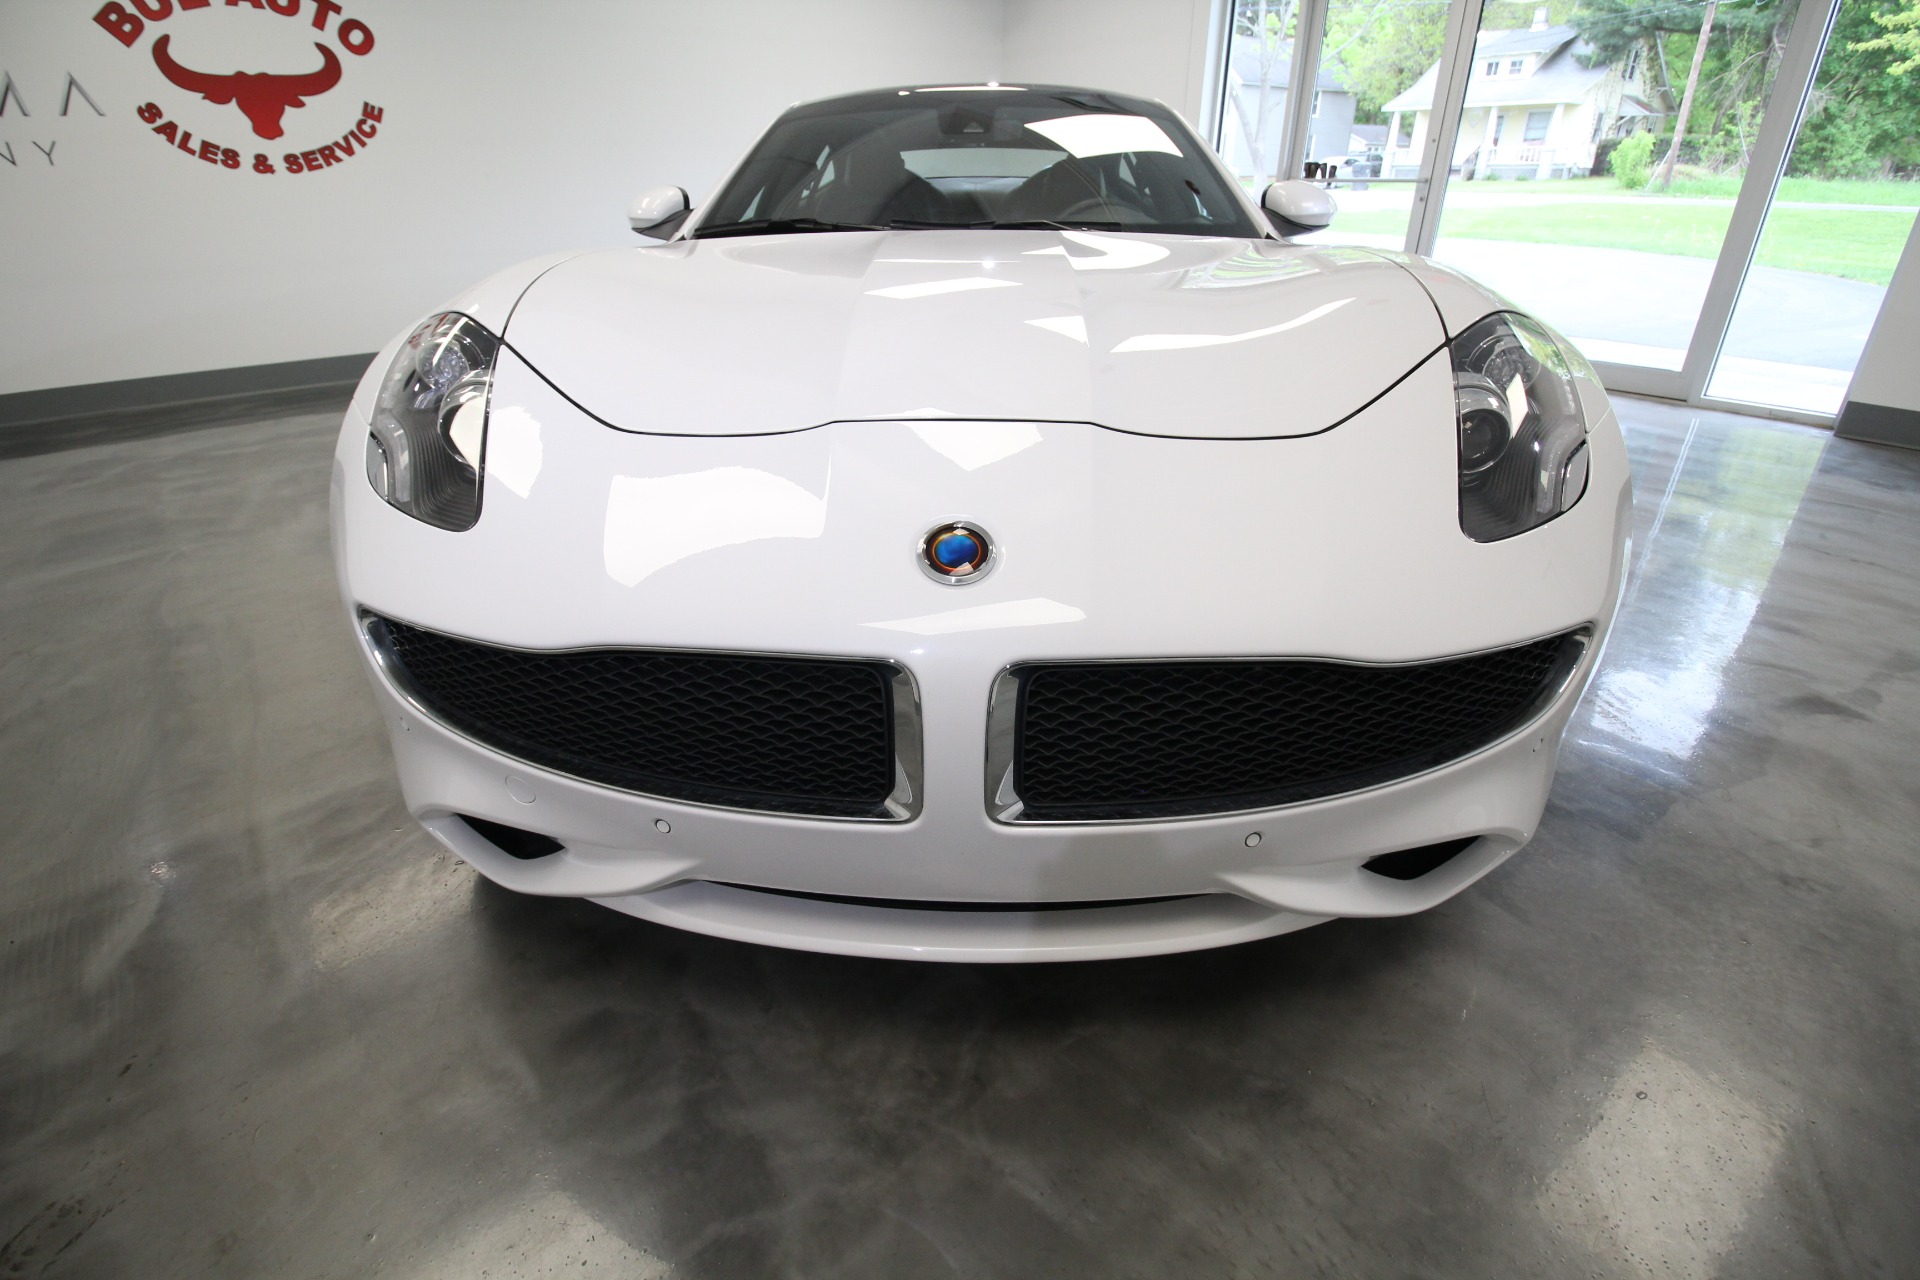 Used 2018 WHITE KARMA REVERO REVERO 1 OWNER LEASE TURN IN LOCAL SOLD NEW BY US | Albany, NY